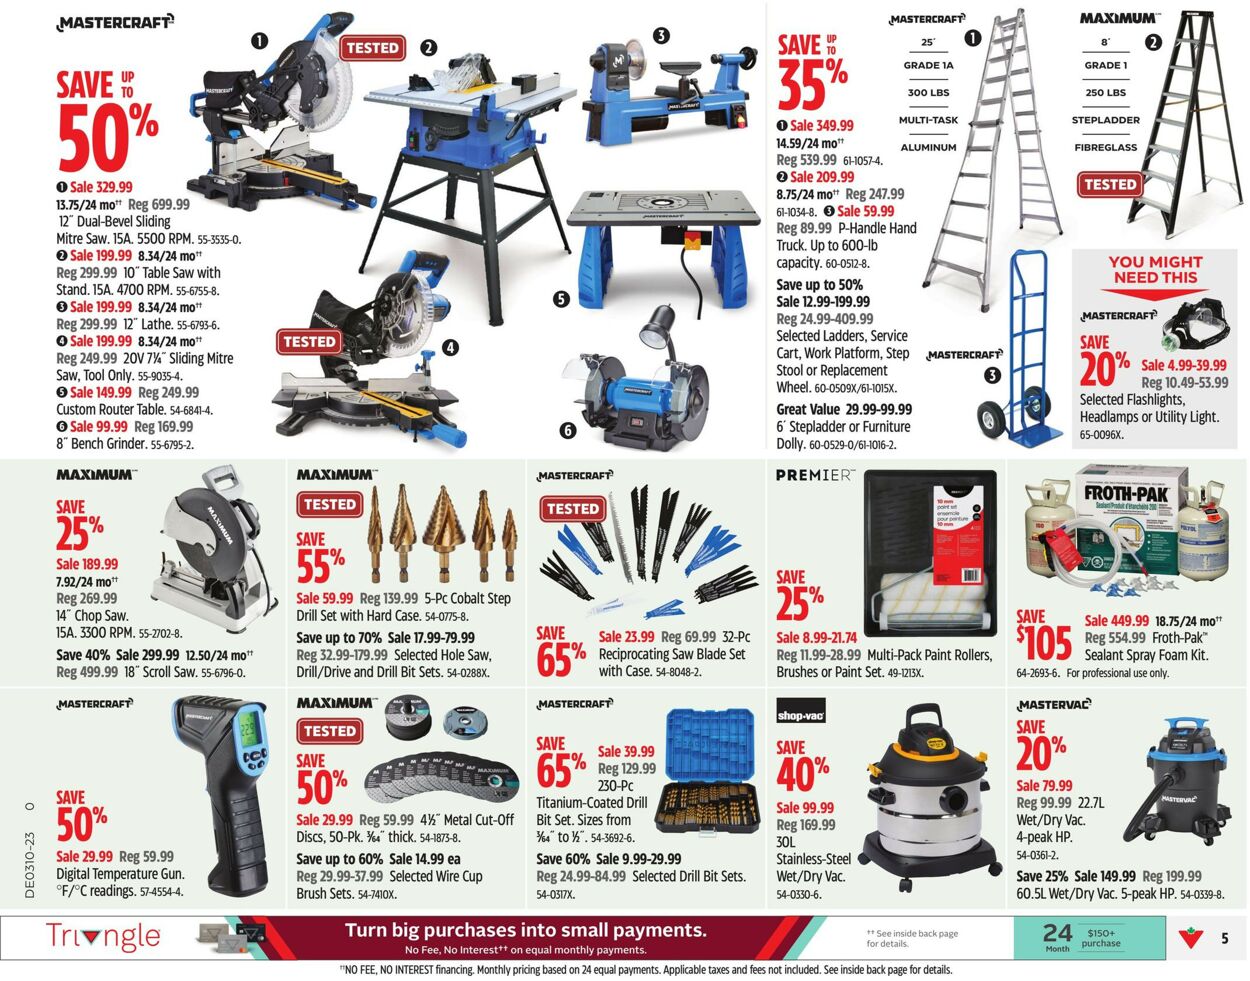 Canadian Tire Flyer from 03/02/2023